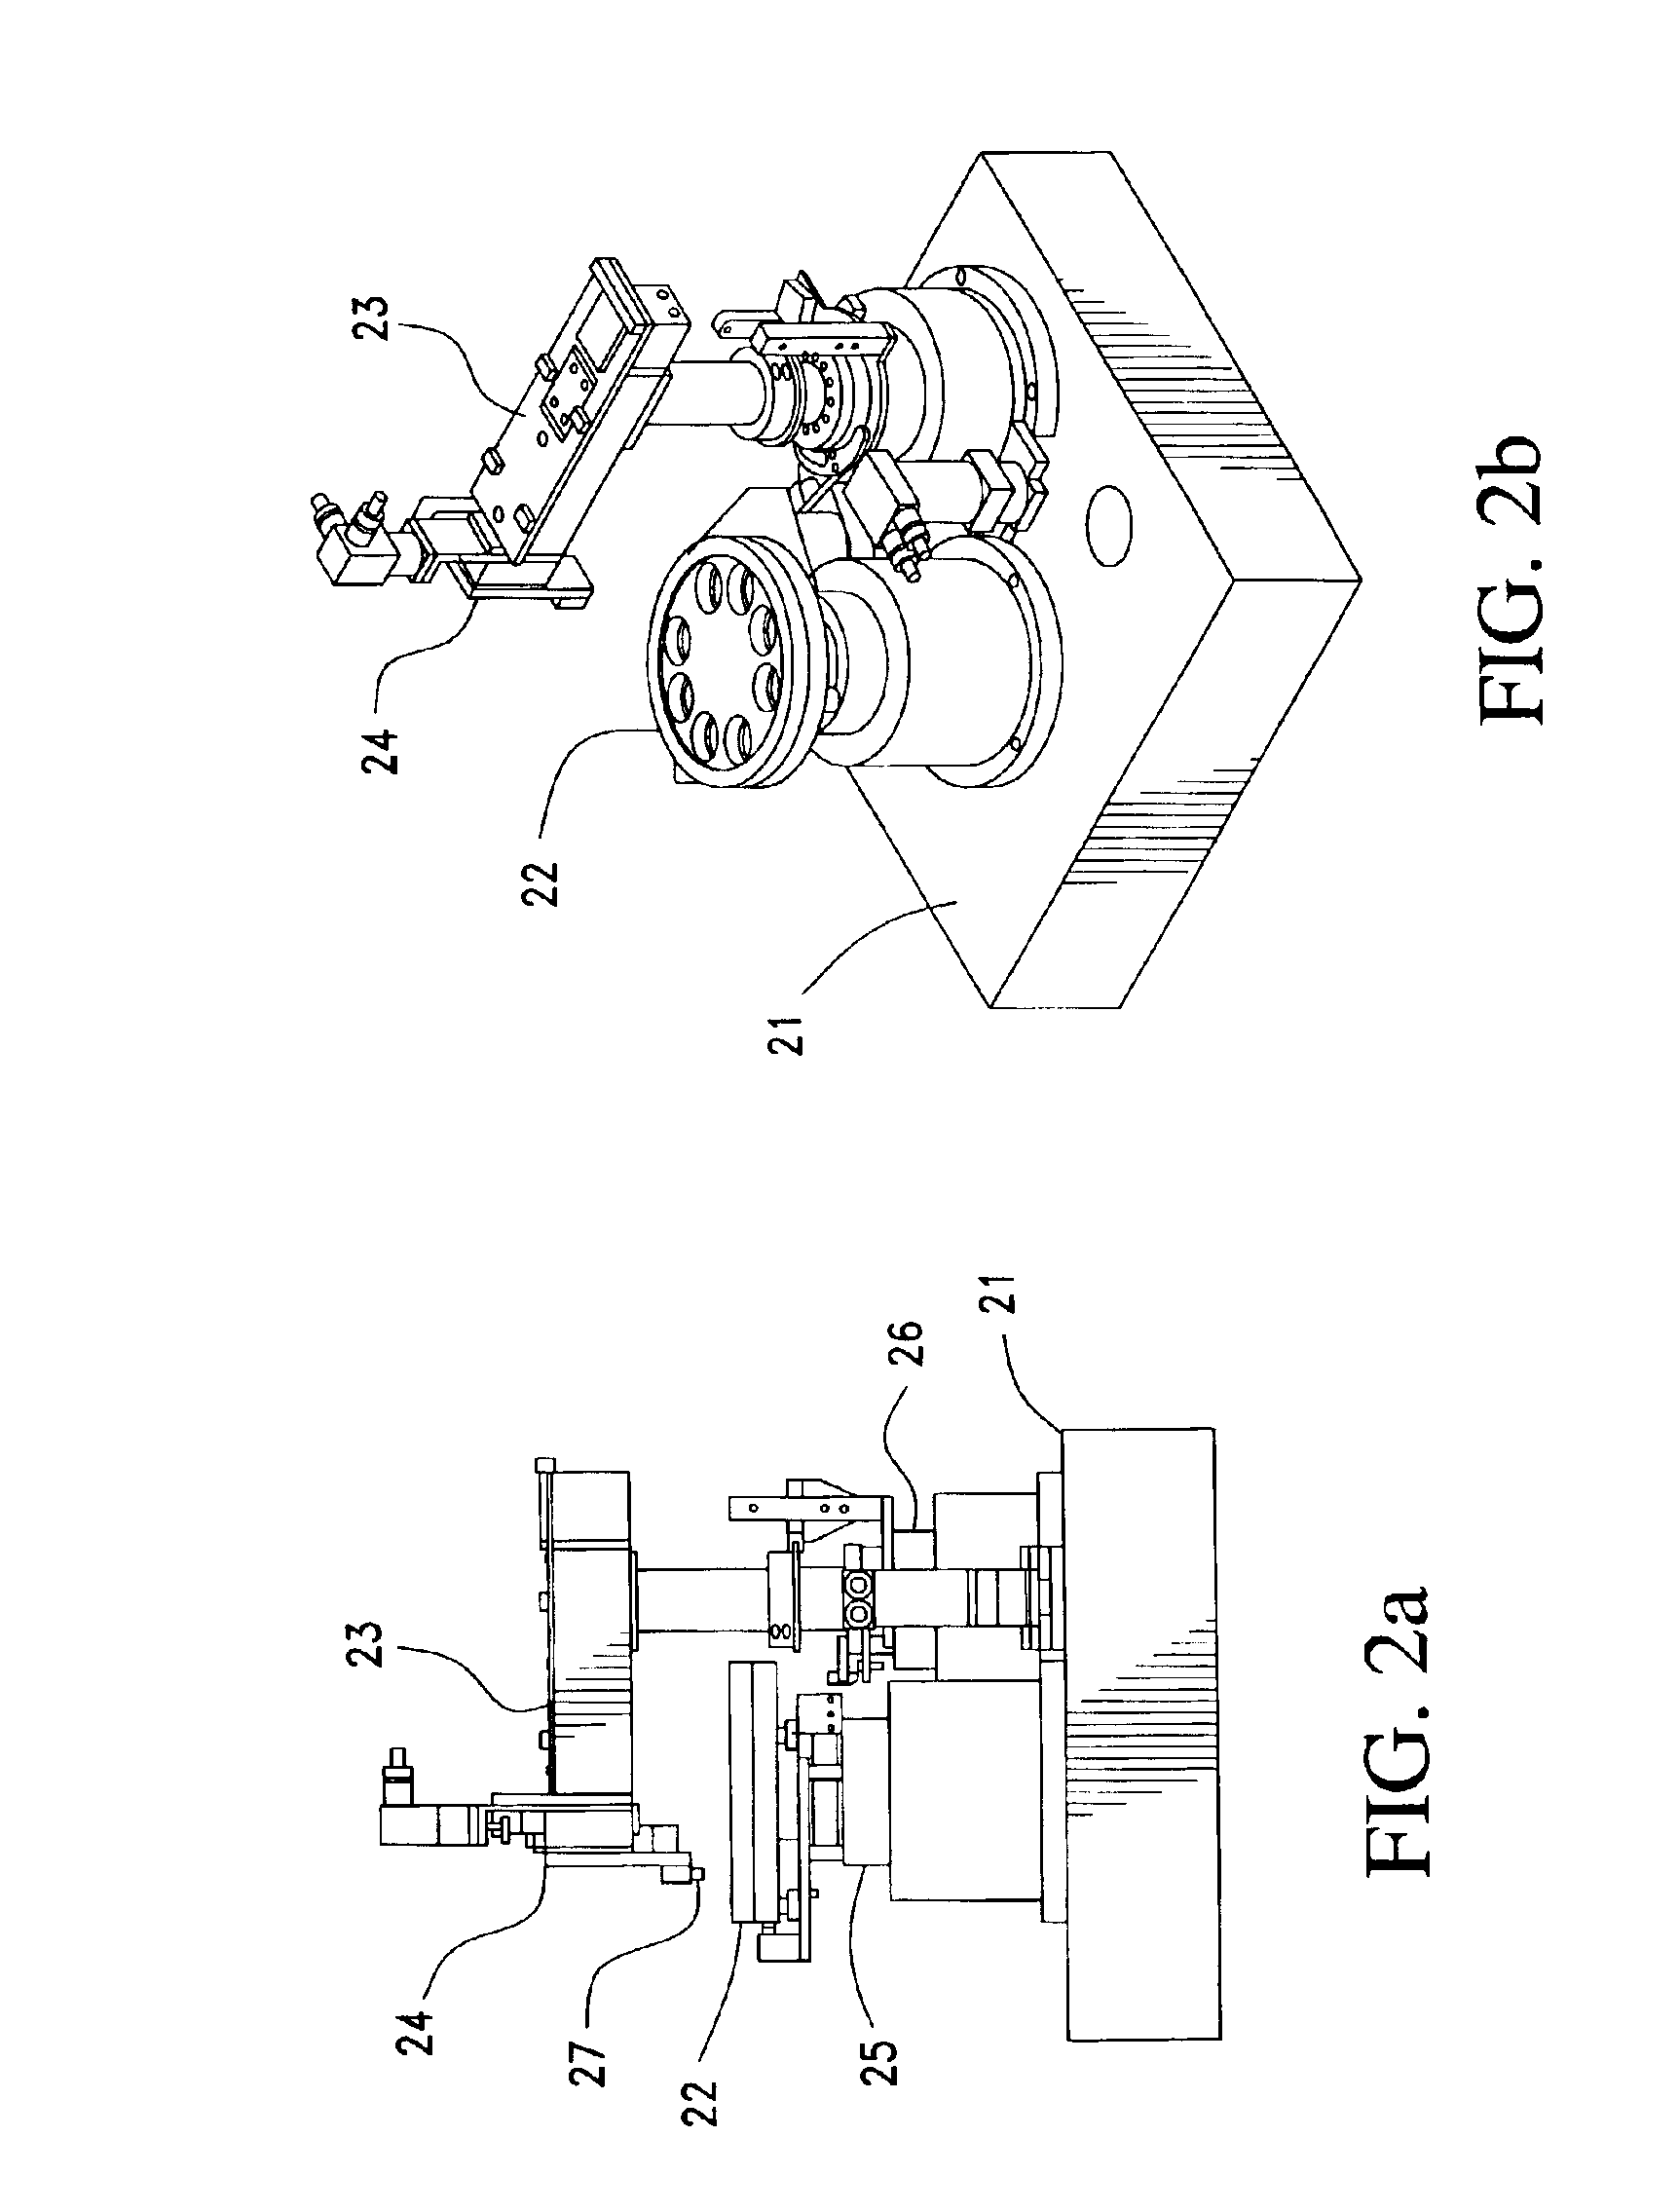 Lapping plate topography system